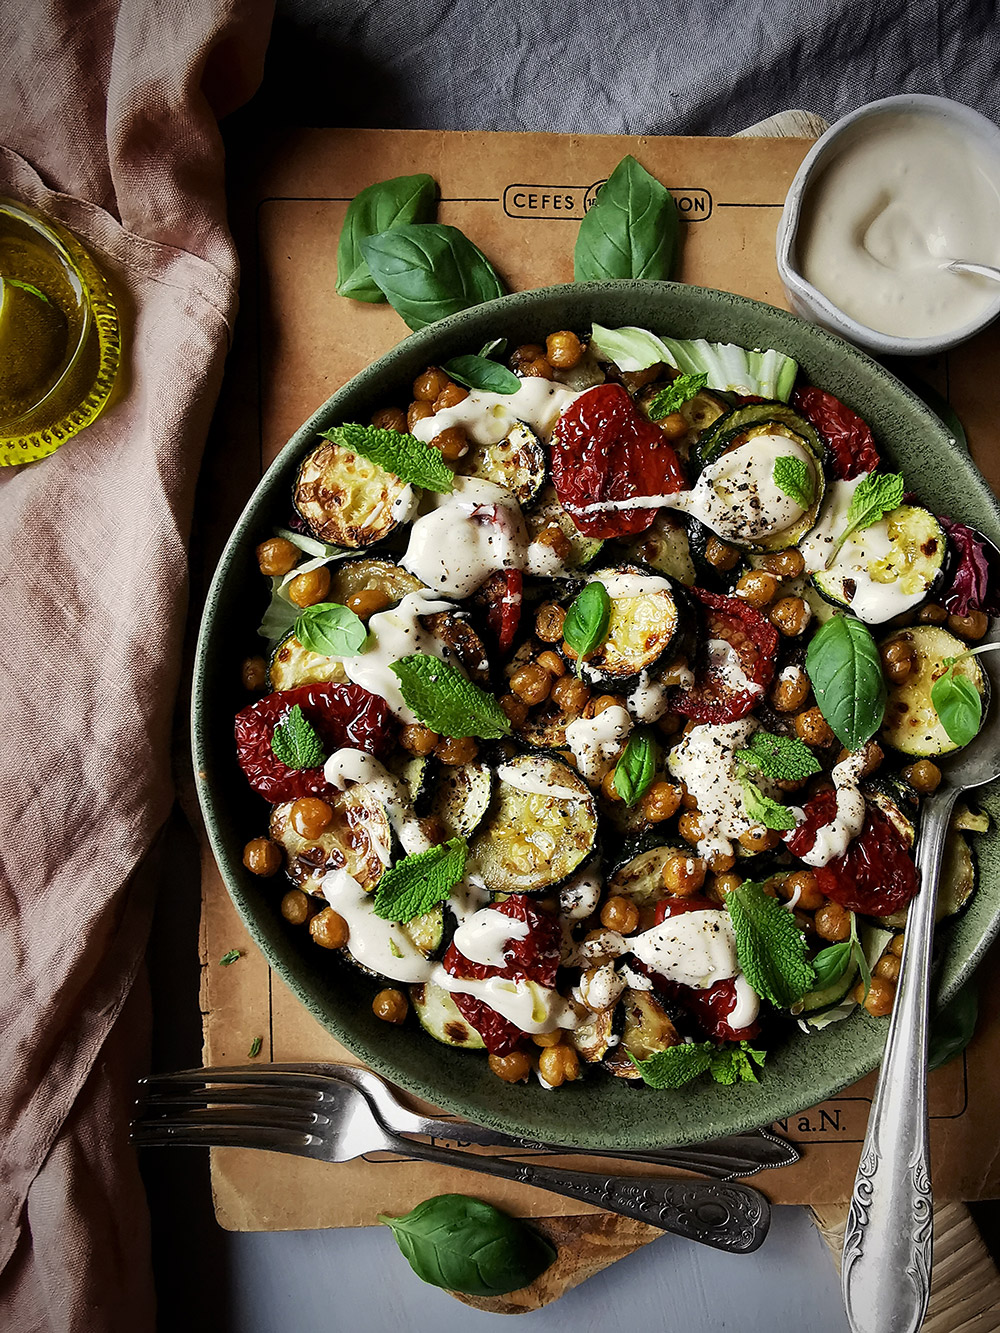 Zucchini, chickpeas and sun-dried tomatoes